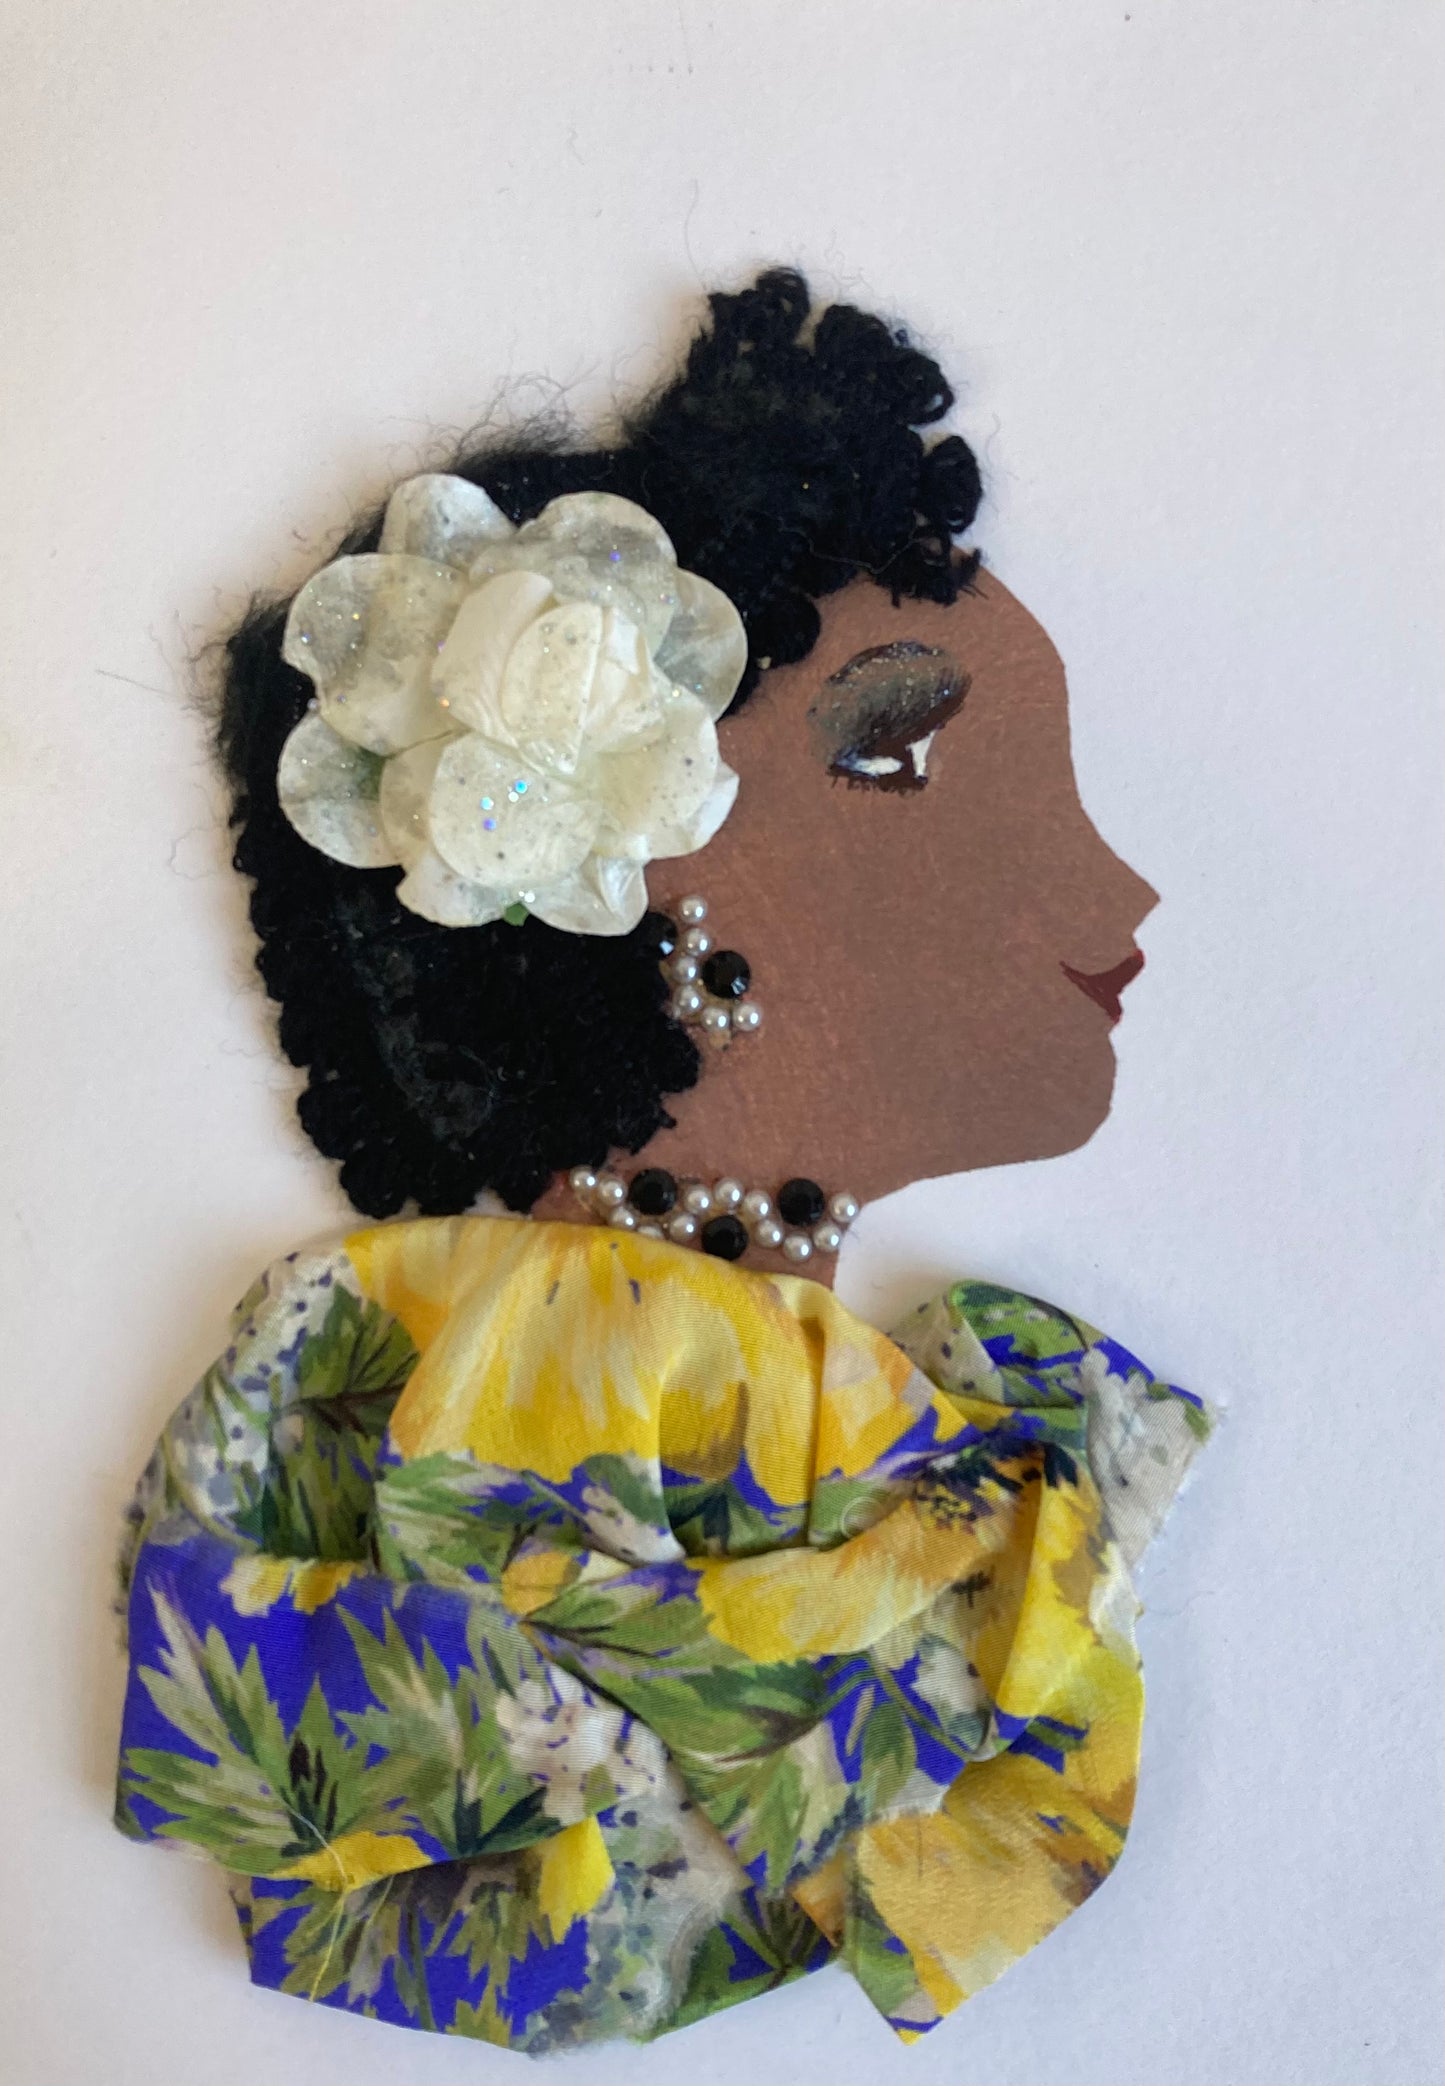 This card is called Hattie. Hattie wears a floral print blouse with blue, yellow and green, and a white flower in her curly black hair. 